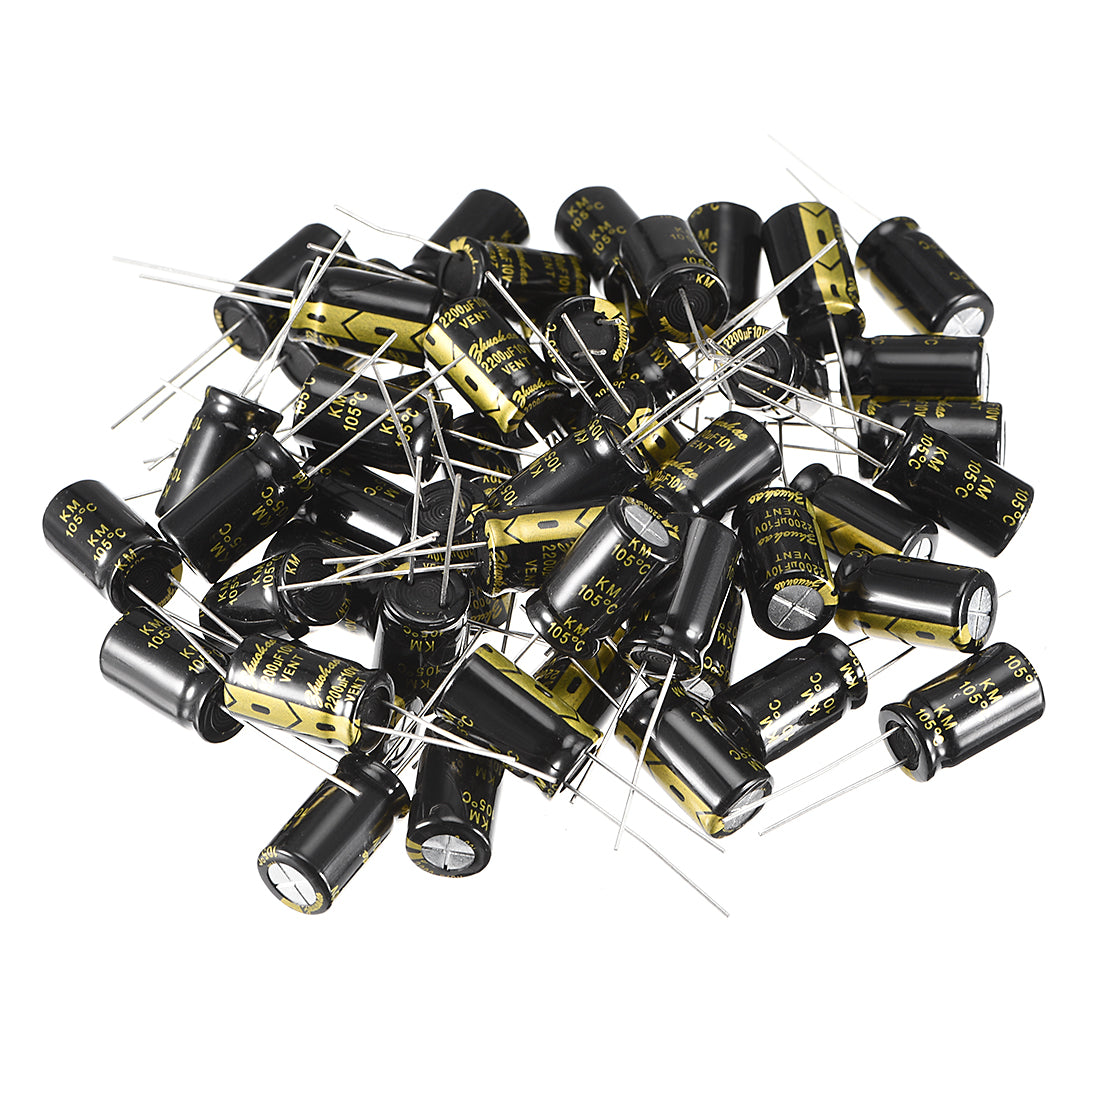 uxcell Uxcell Aluminum Radial Electrolytic Capacitor with 2200uF 10V 105 Celsius Life 2000H 10 x 17 mm Black 50pcs